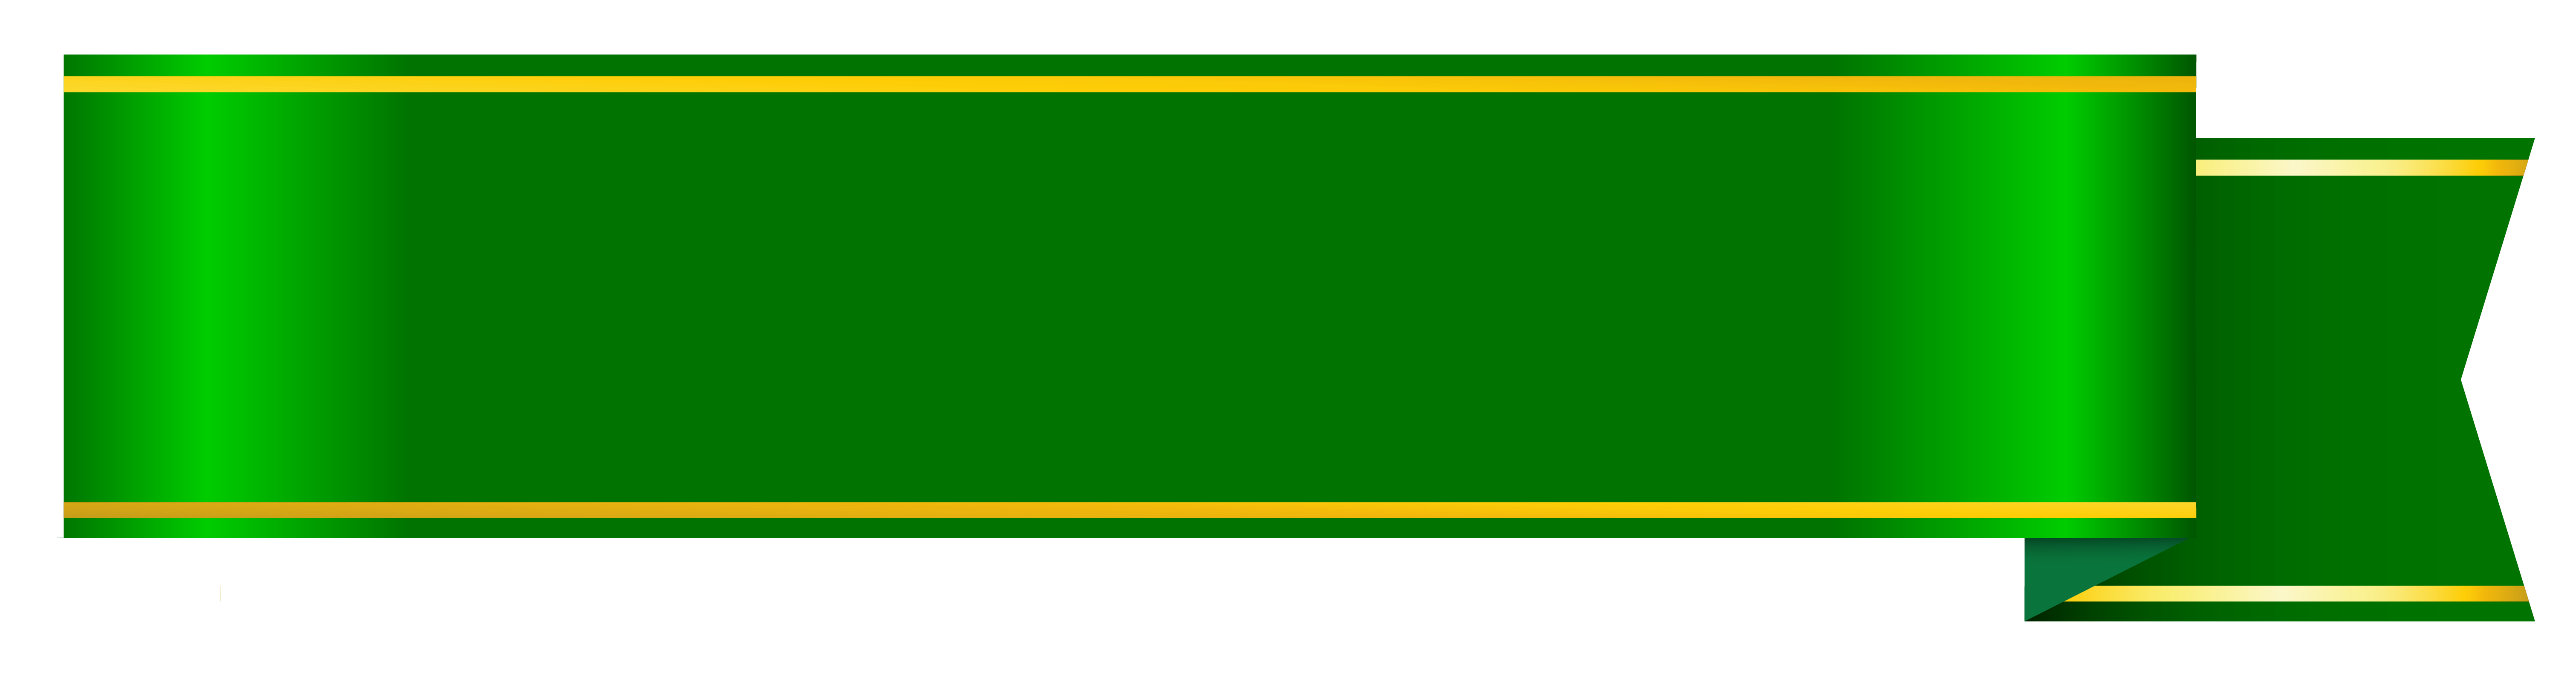 Green Banner Download PNG Image